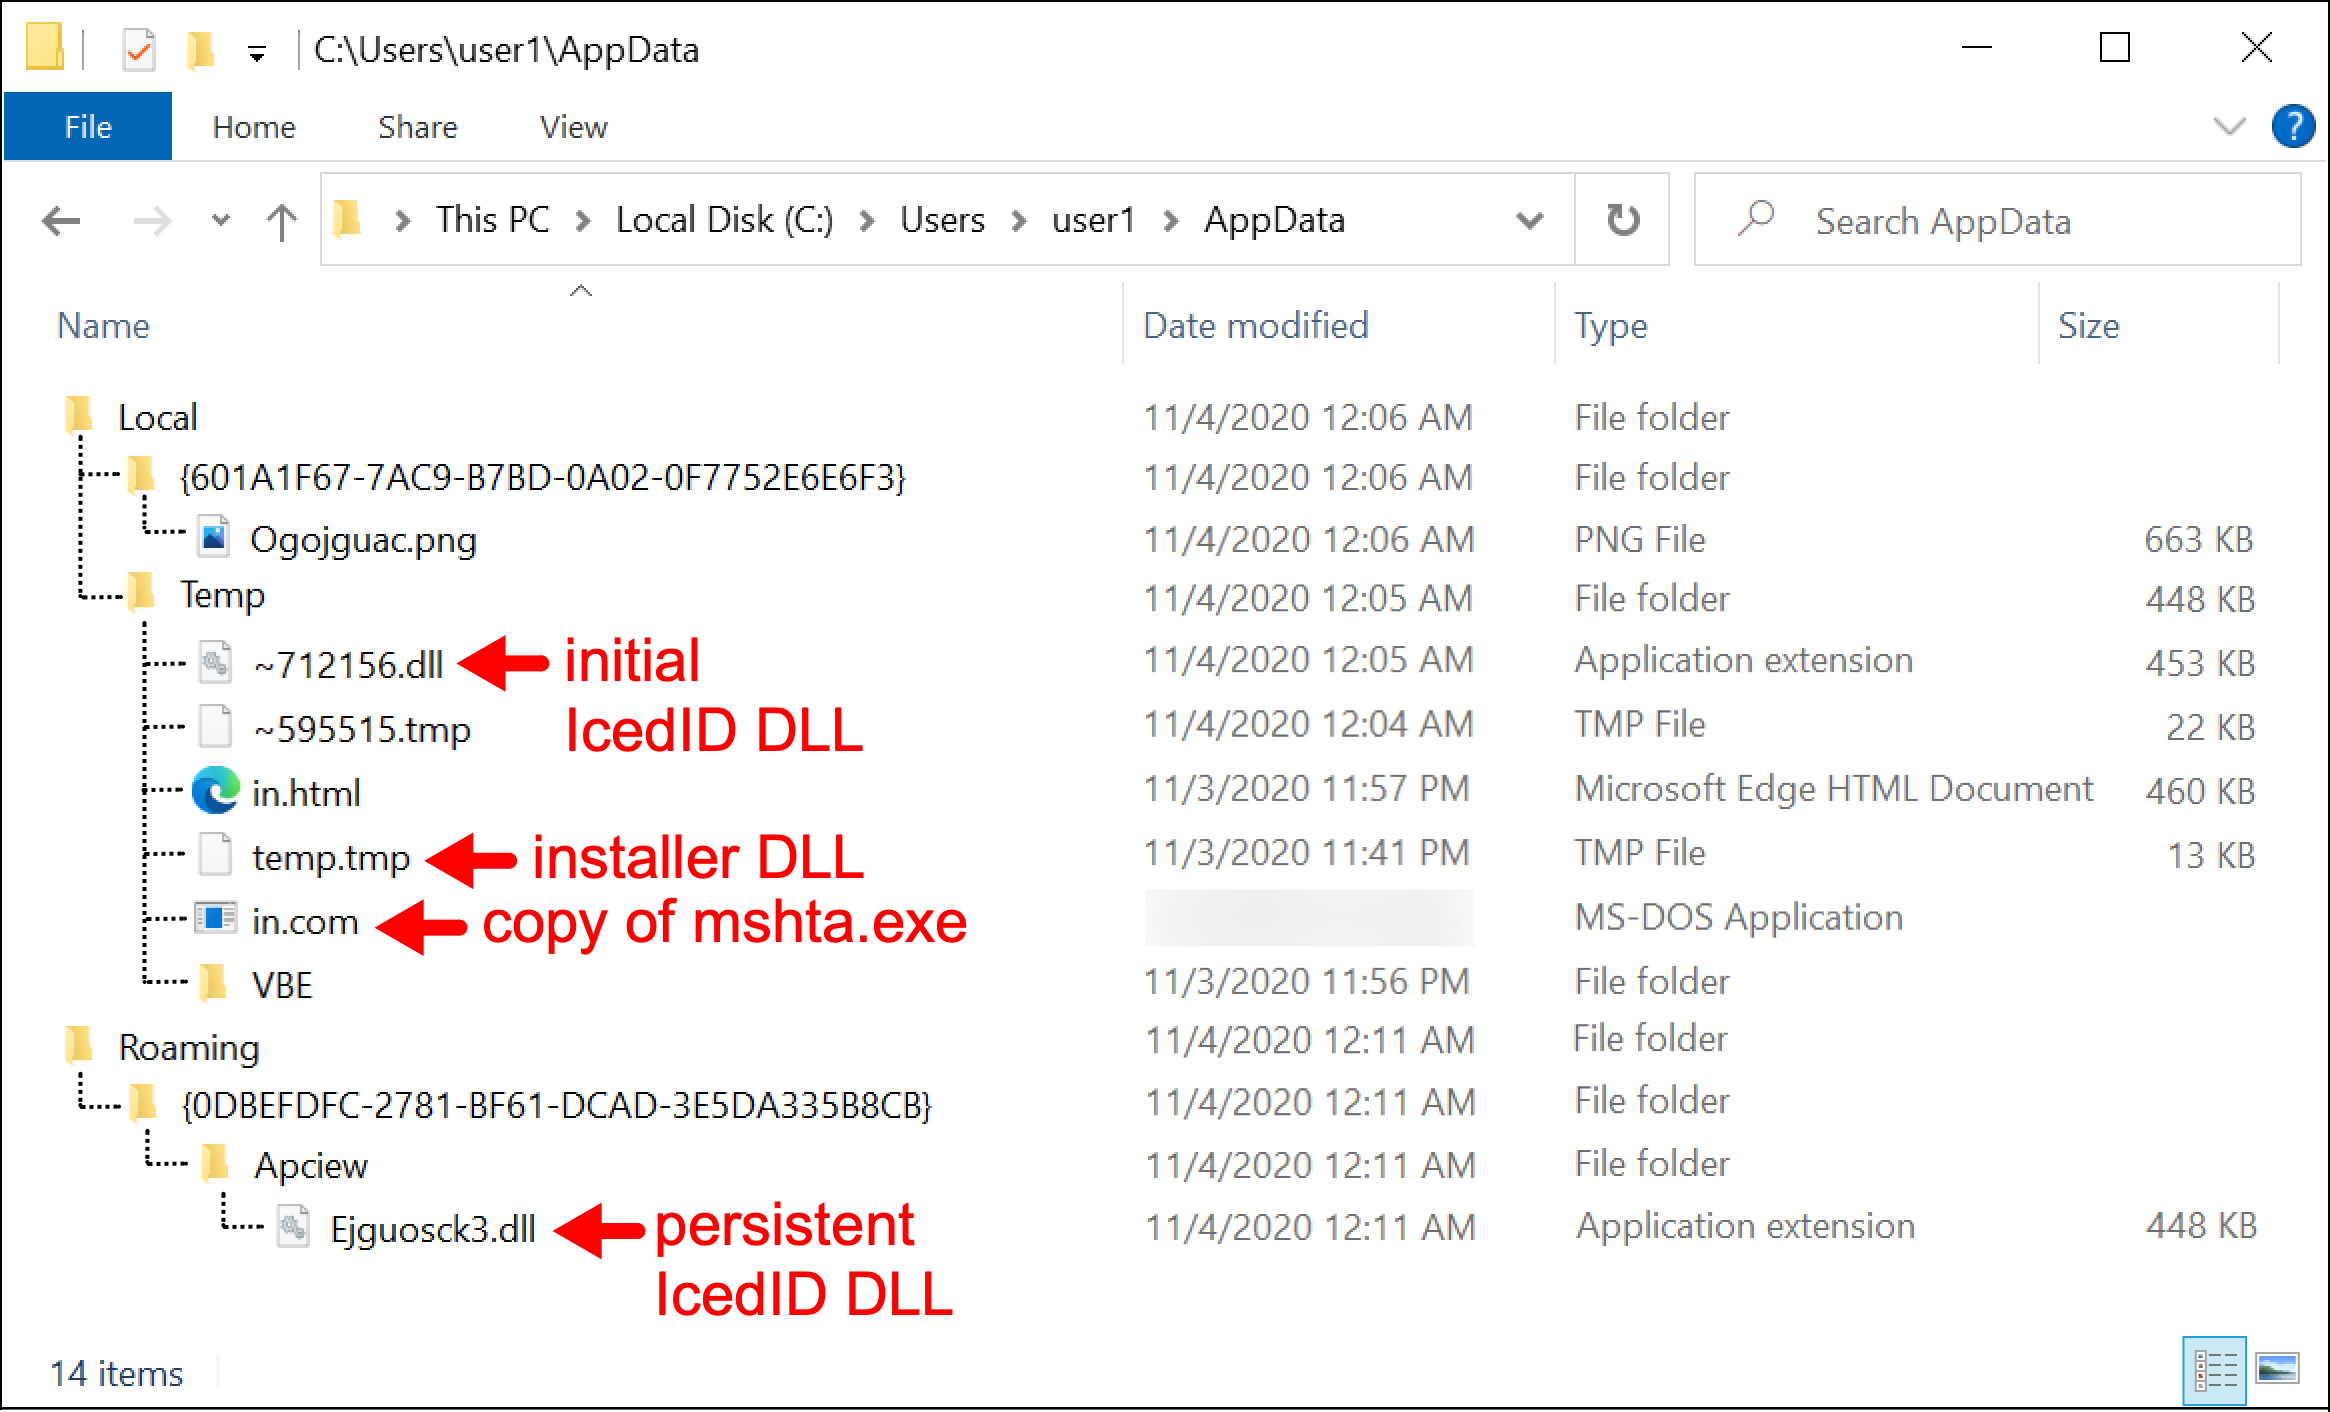 Files and directories created during the infection process on a Windows host include the inital IcedID DLL, installer DLL, copy of mshta.exe and persistent IcedID DLL. These files and directories are indicated with red arrows in the screenshot. 